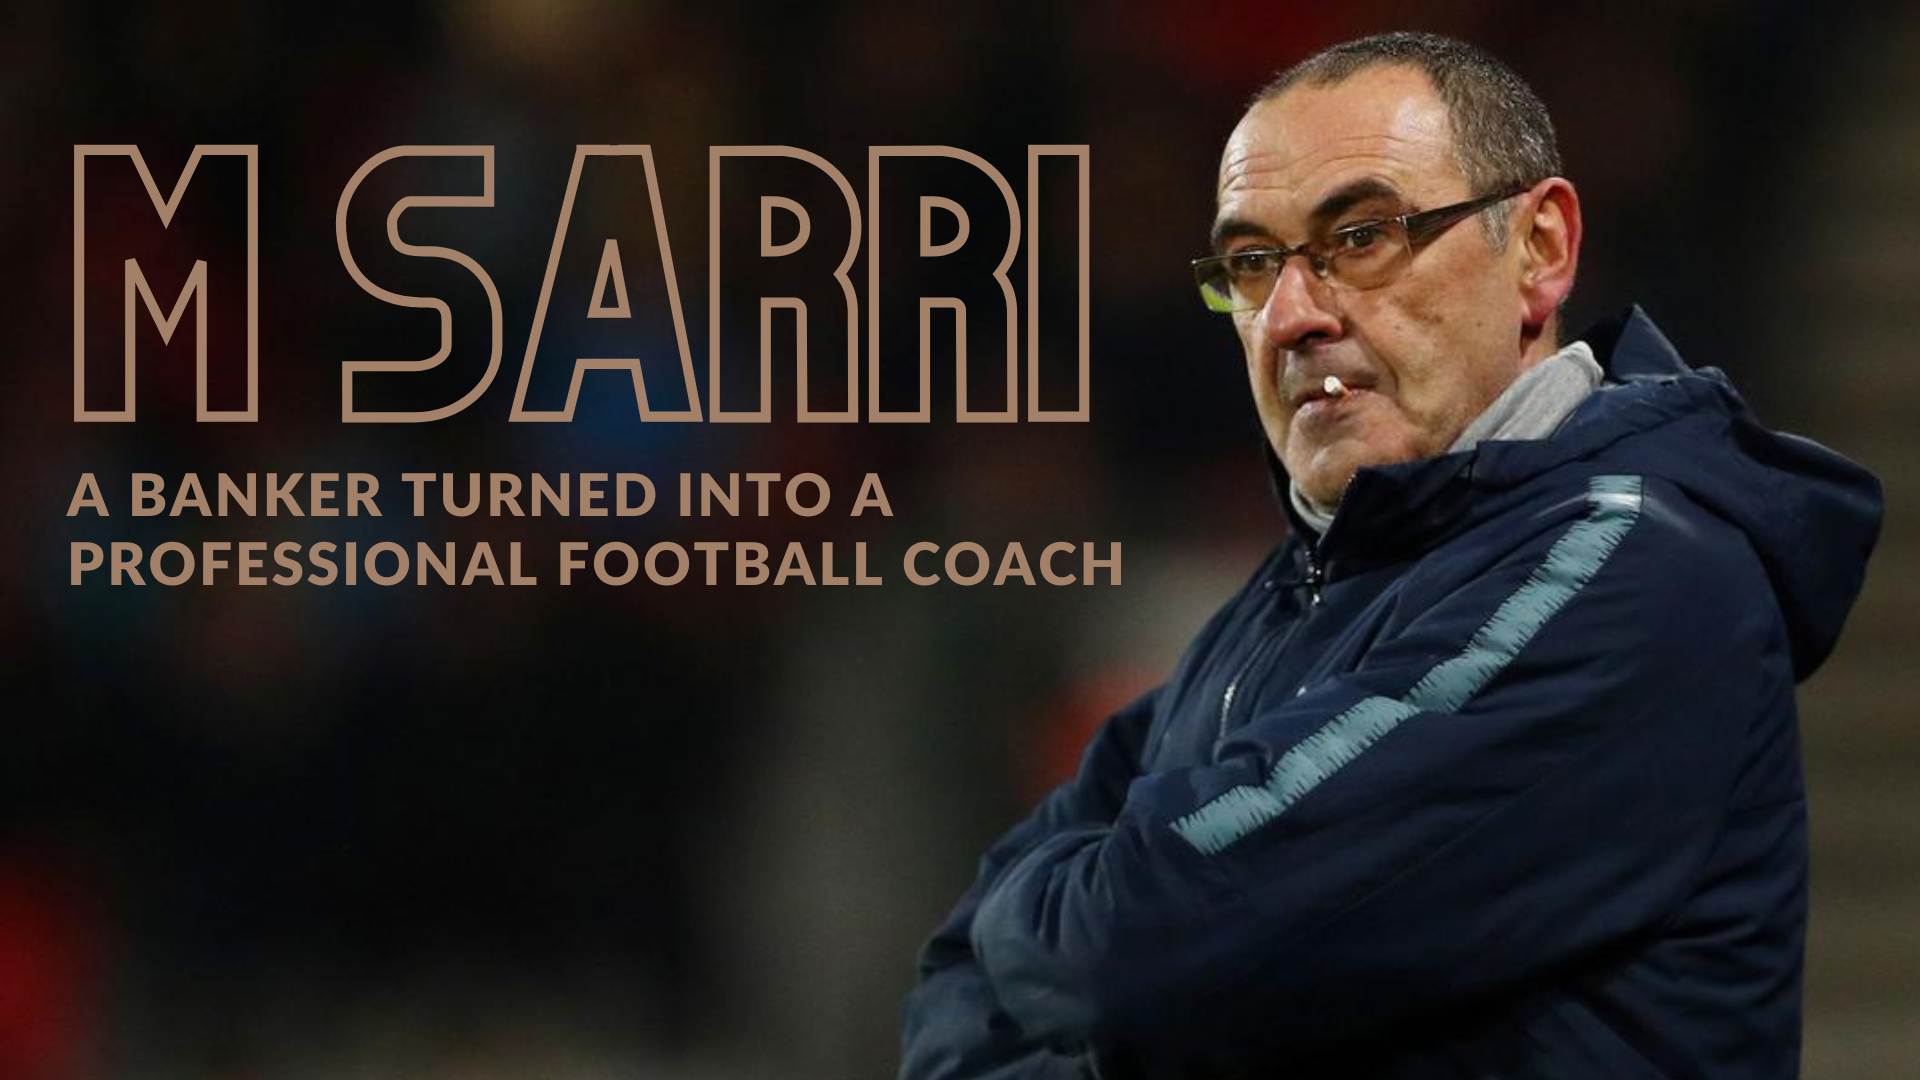 M Sarri - A Banker Turned Into A Professional Football Coach